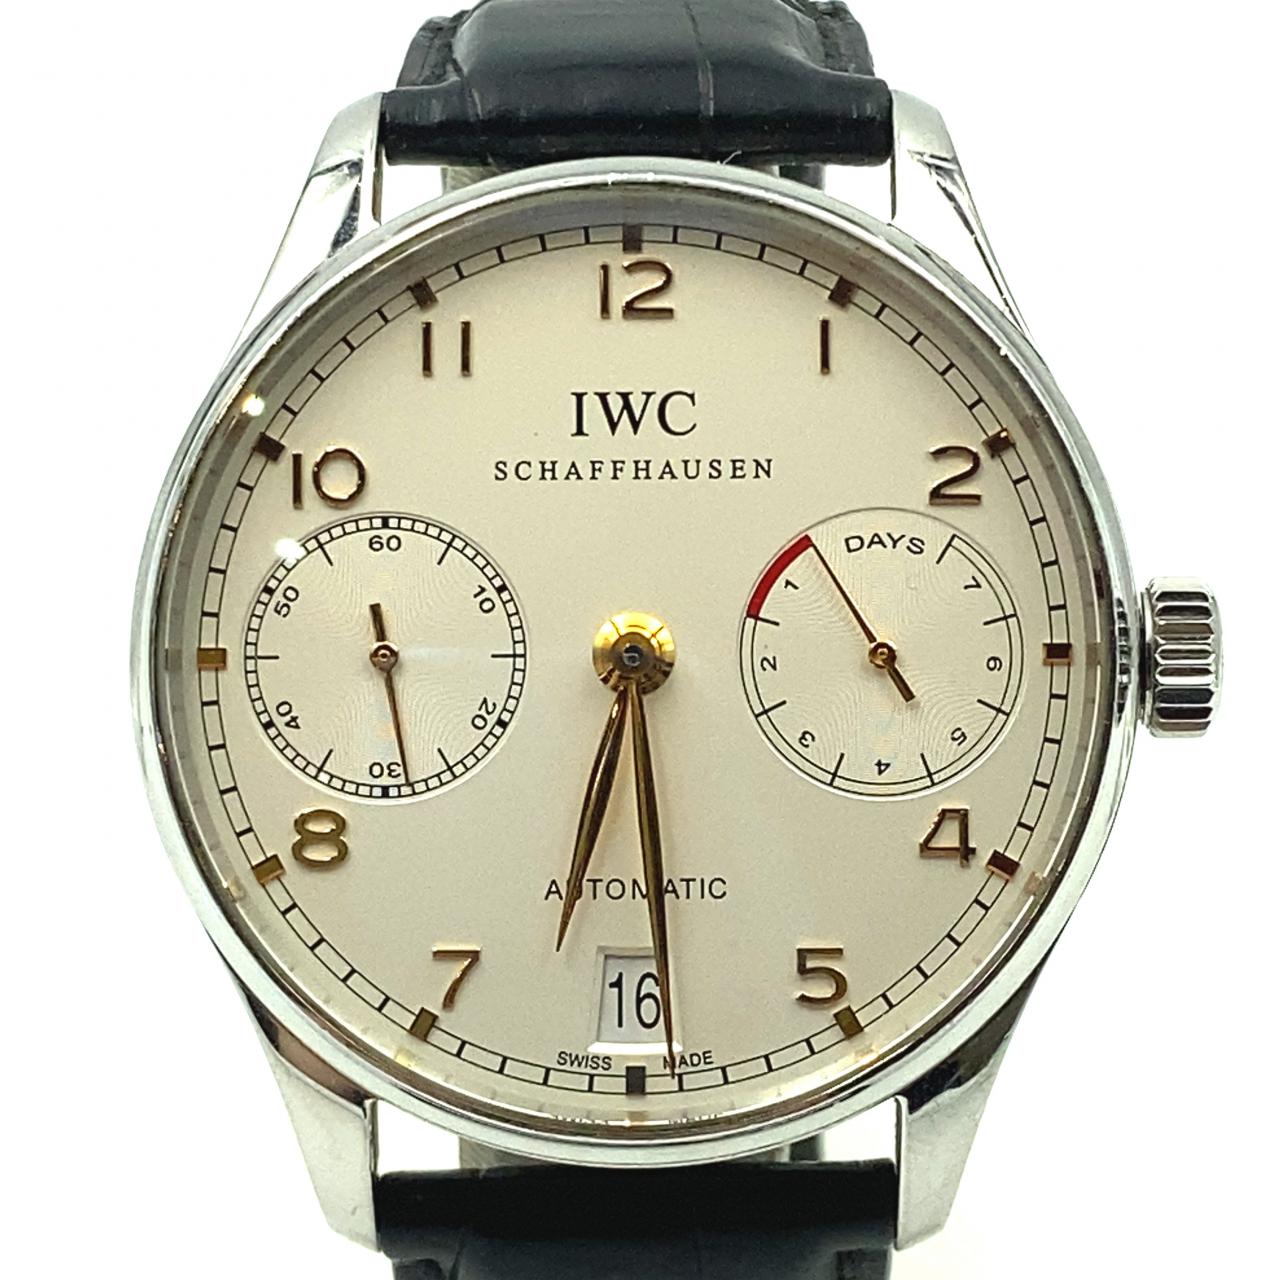 Pre-Owned IWC Portugieser 42mm Stainless Steel Chronograph Watch IW500114